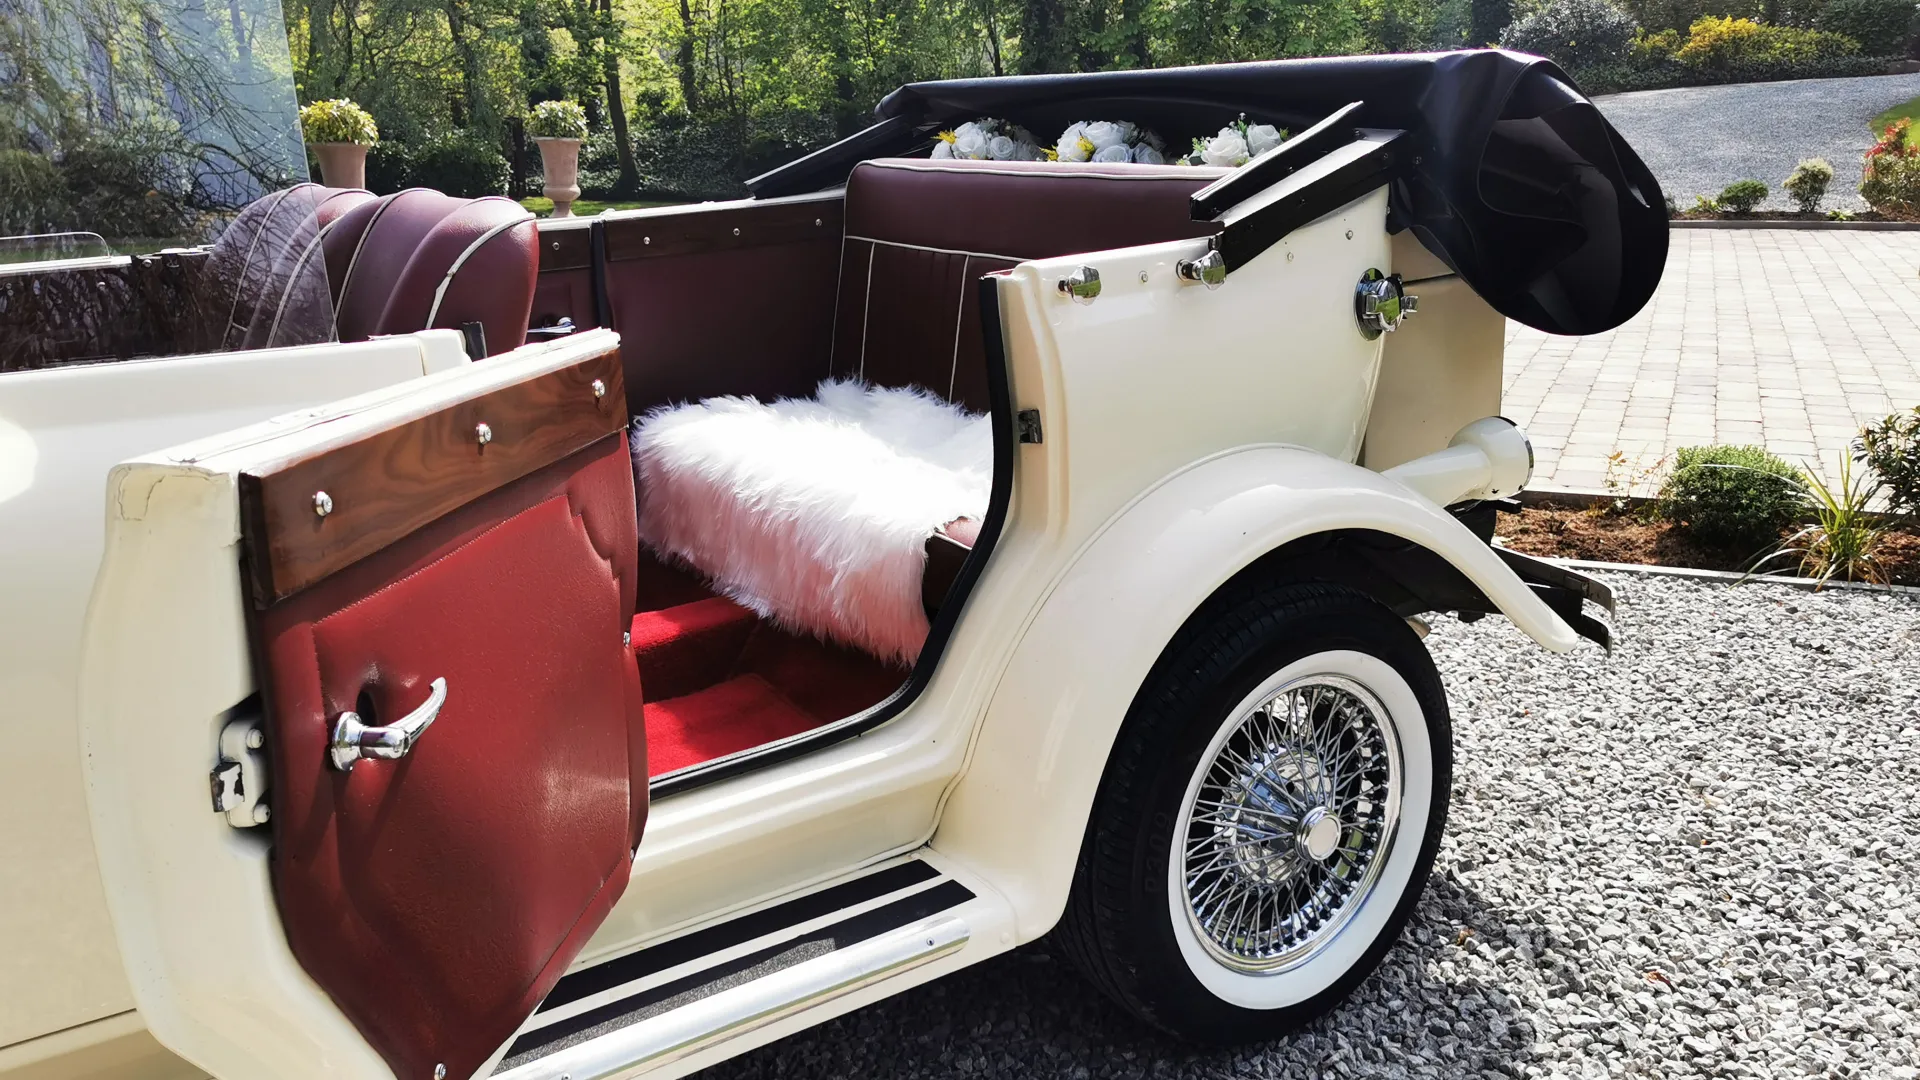 Side view of Convertible Vintage Beauford with roof down and rear passenger door open showing the burgundy leather interior